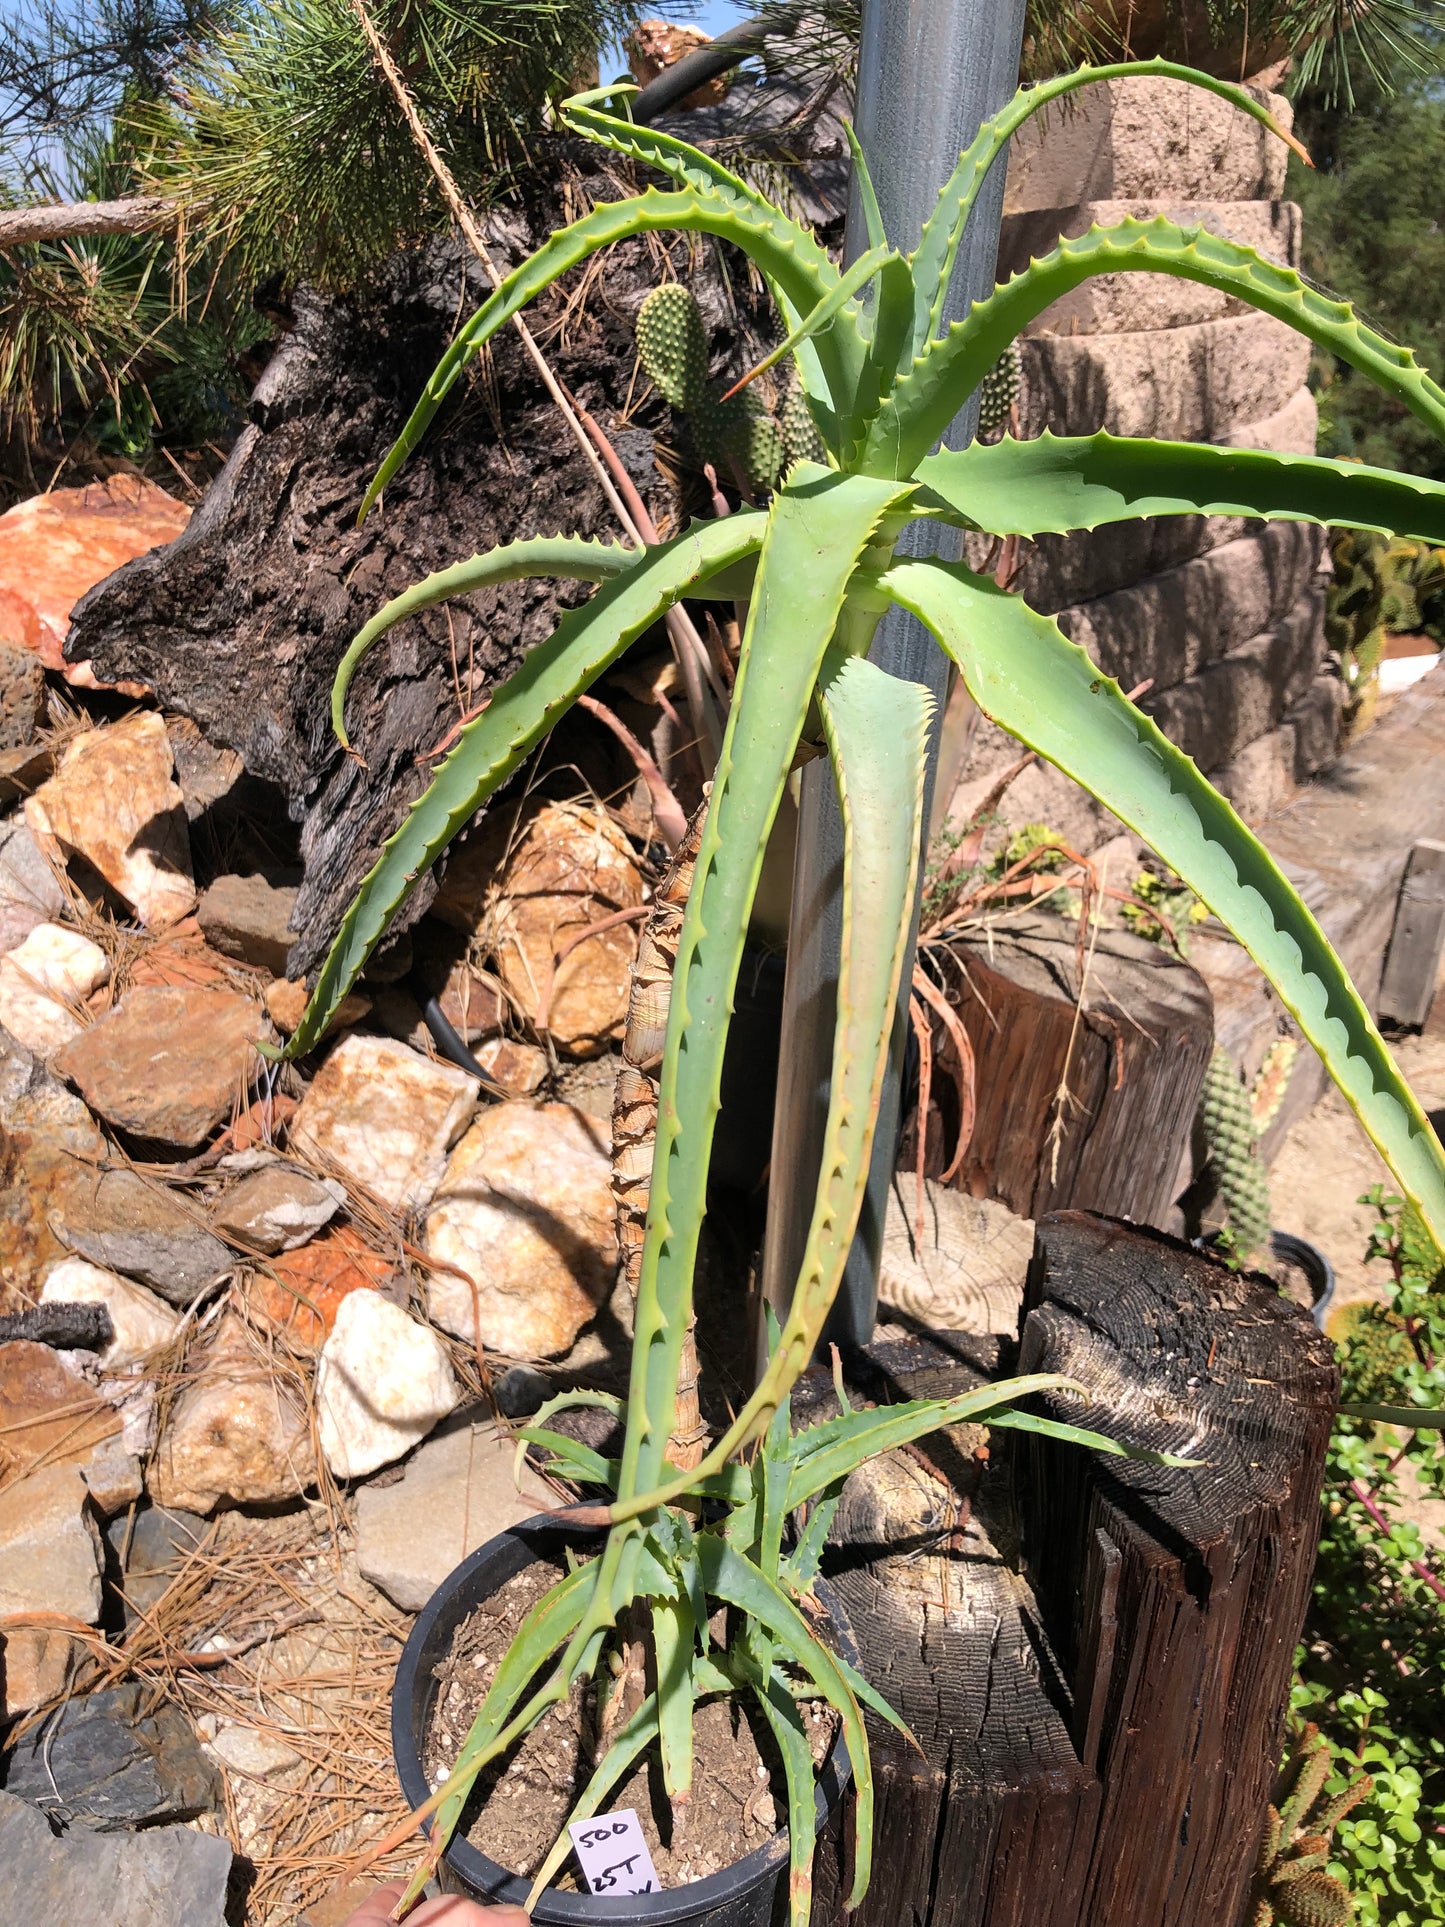 Aloe arborescens "Torch Aloe" 6 Year Old Living Plant Well Rooted 25" Tall #500W